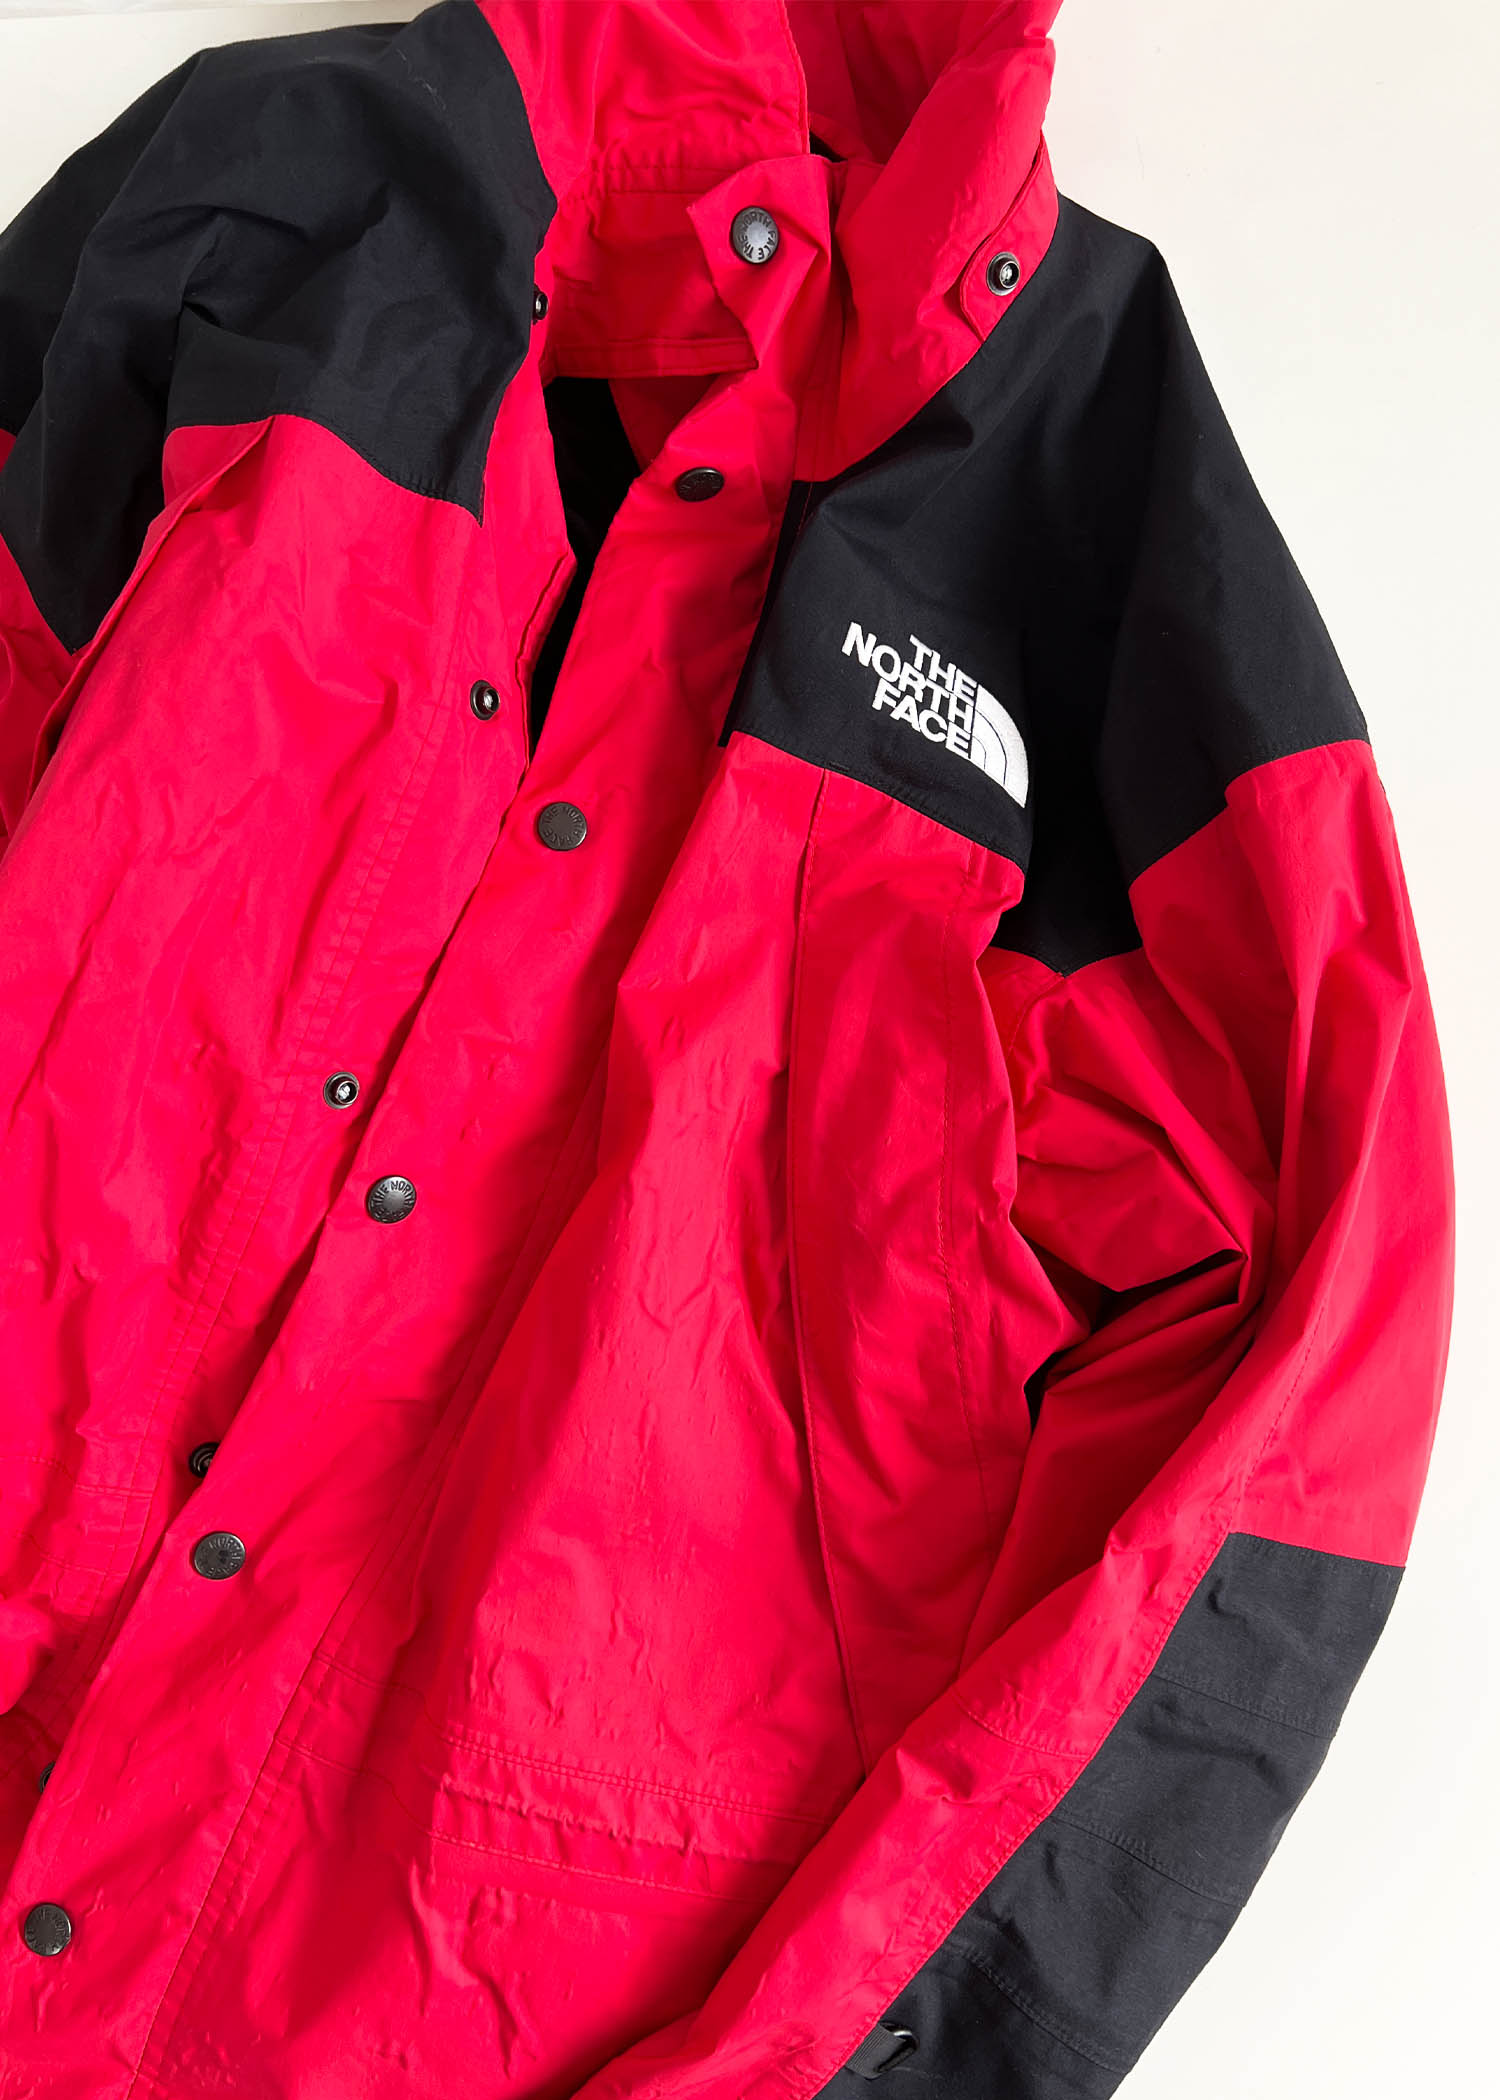 THE NORTH FACE GORE-TEX jacket